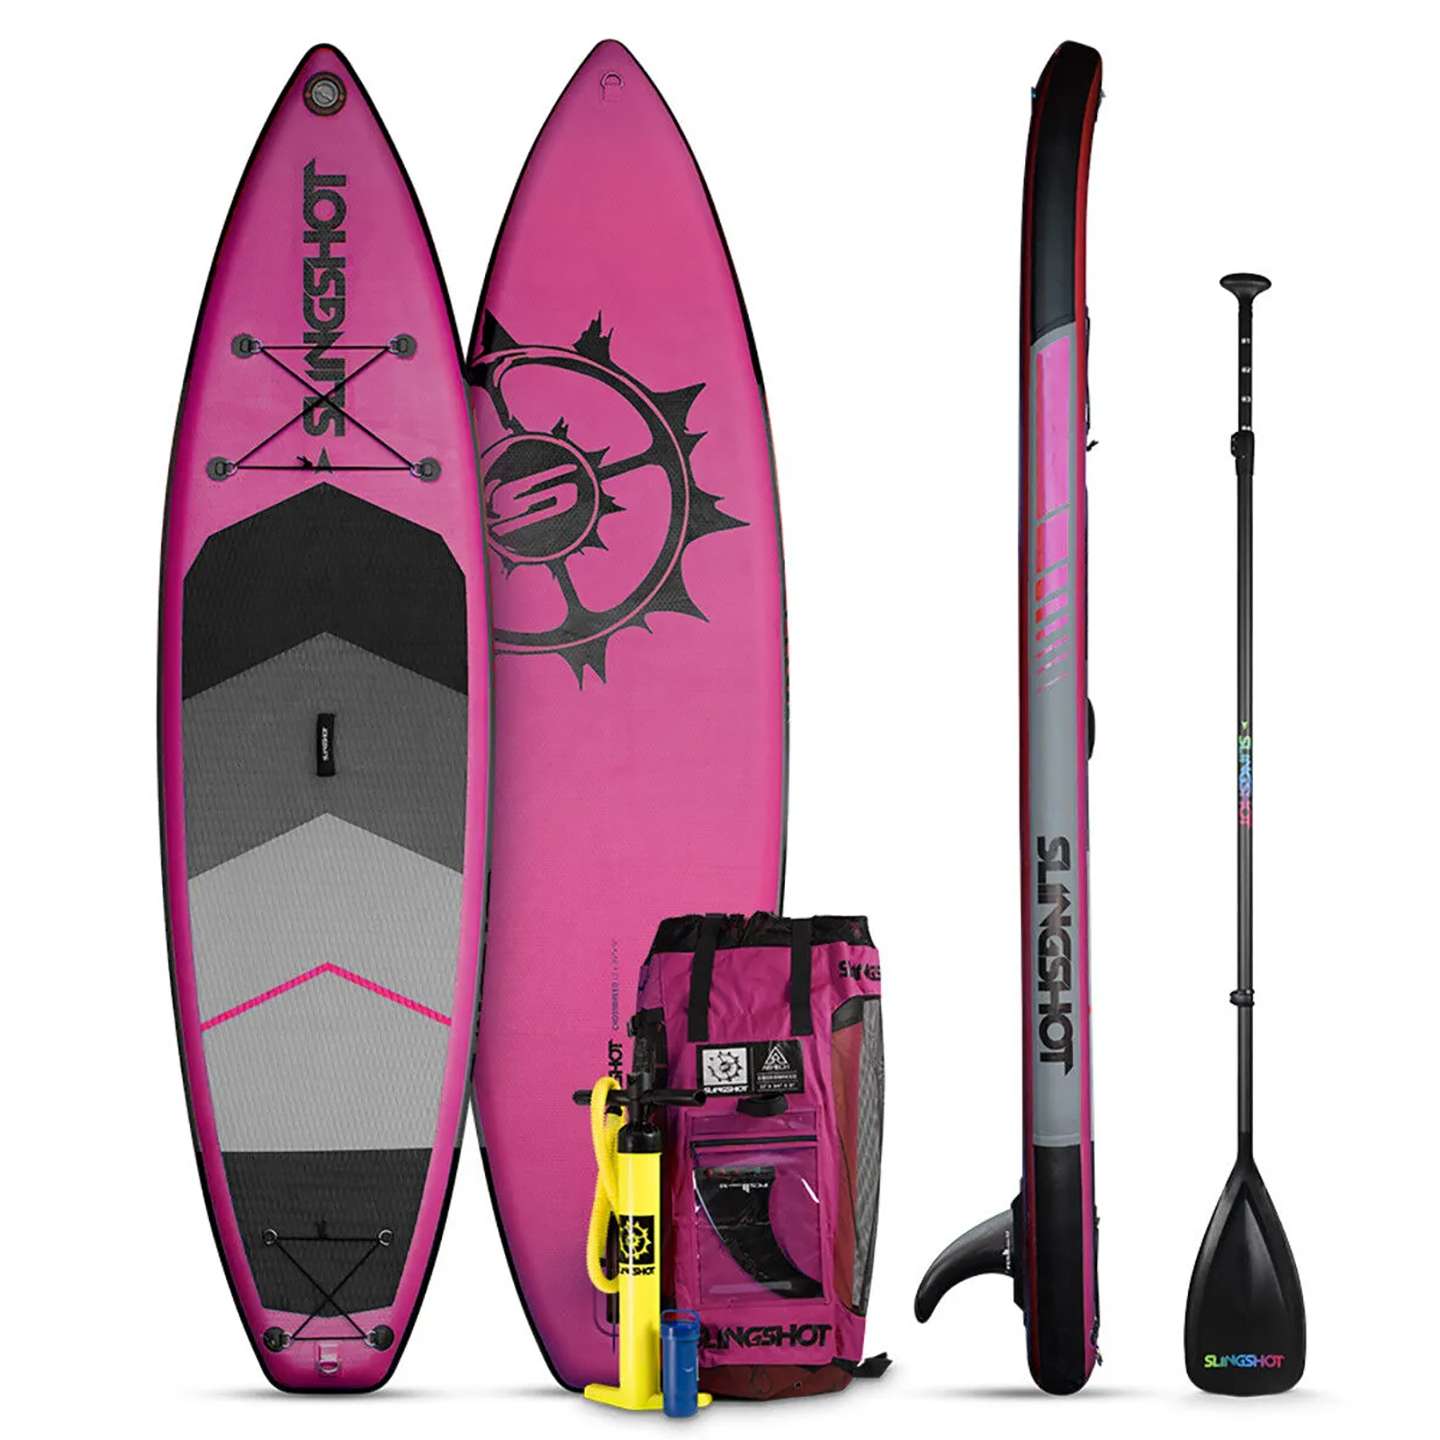 Slingshot Crossbreed 11'0 Inflatable SUP Board | King of Watersports